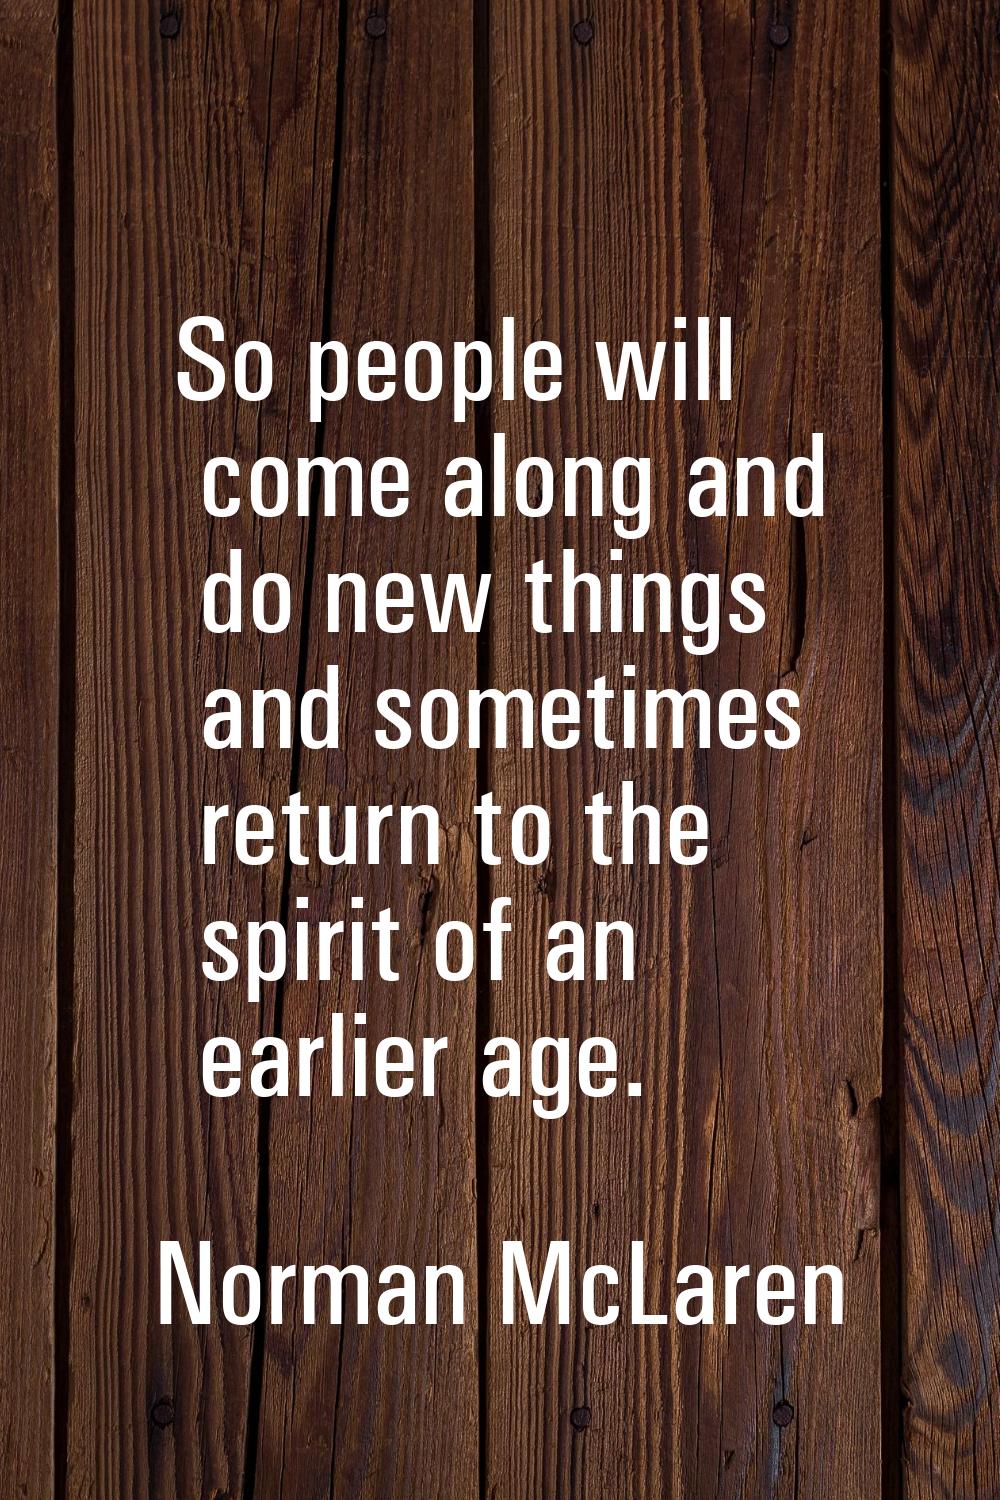 So people will come along and do new things and sometimes return to the spirit of an earlier age.